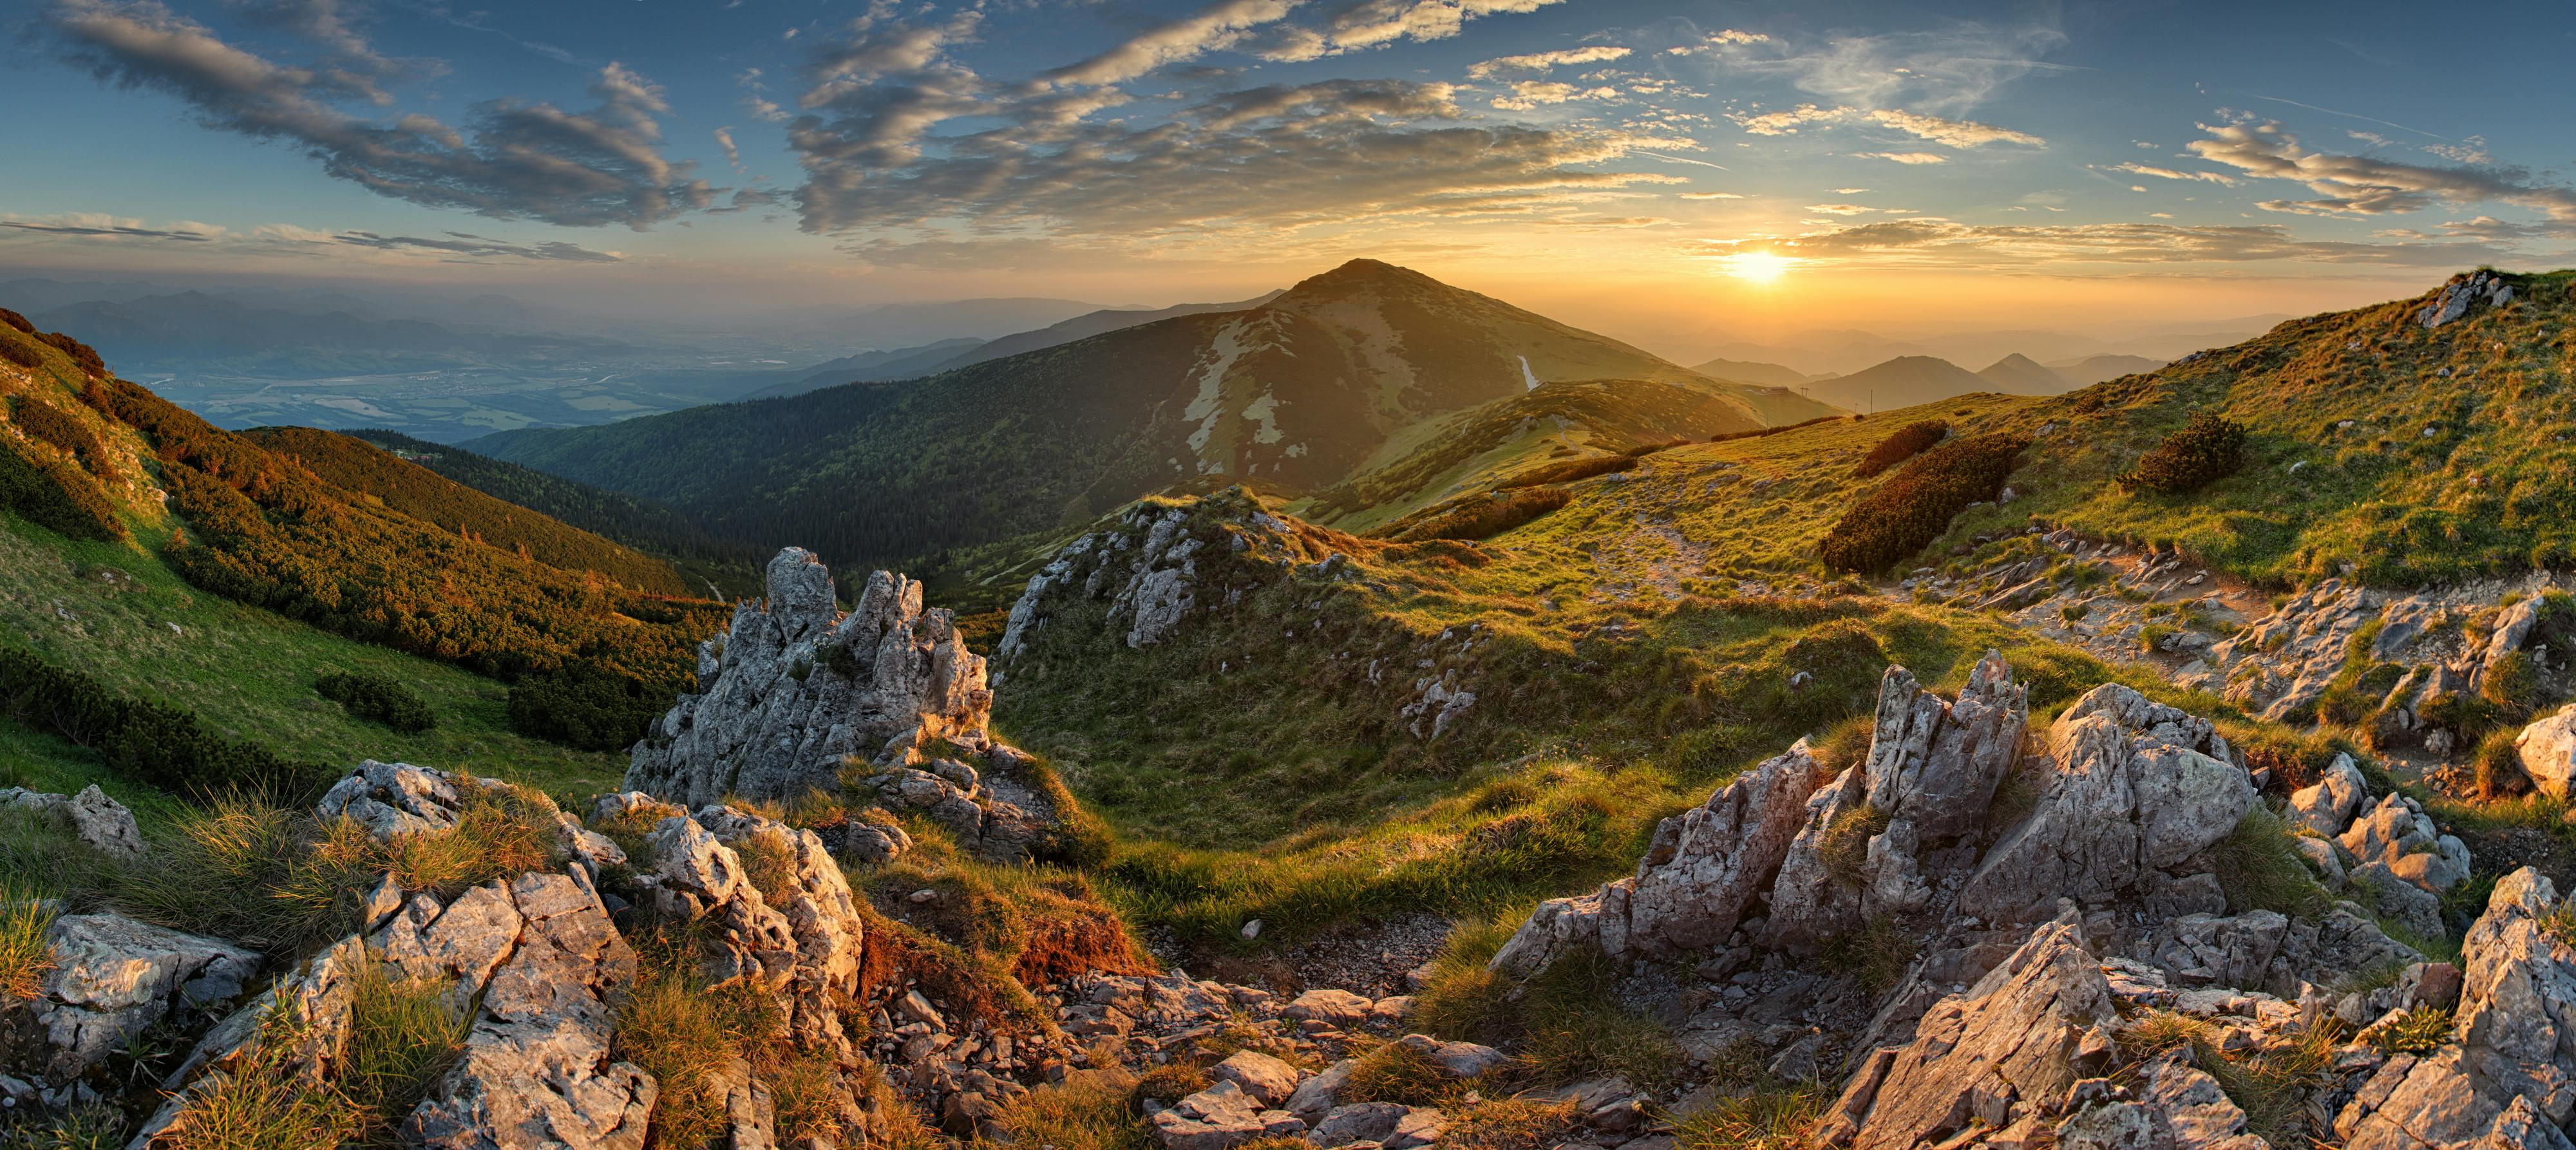 Big Picture Mountain
Panorama rocky mountain at sunset in Slovakia